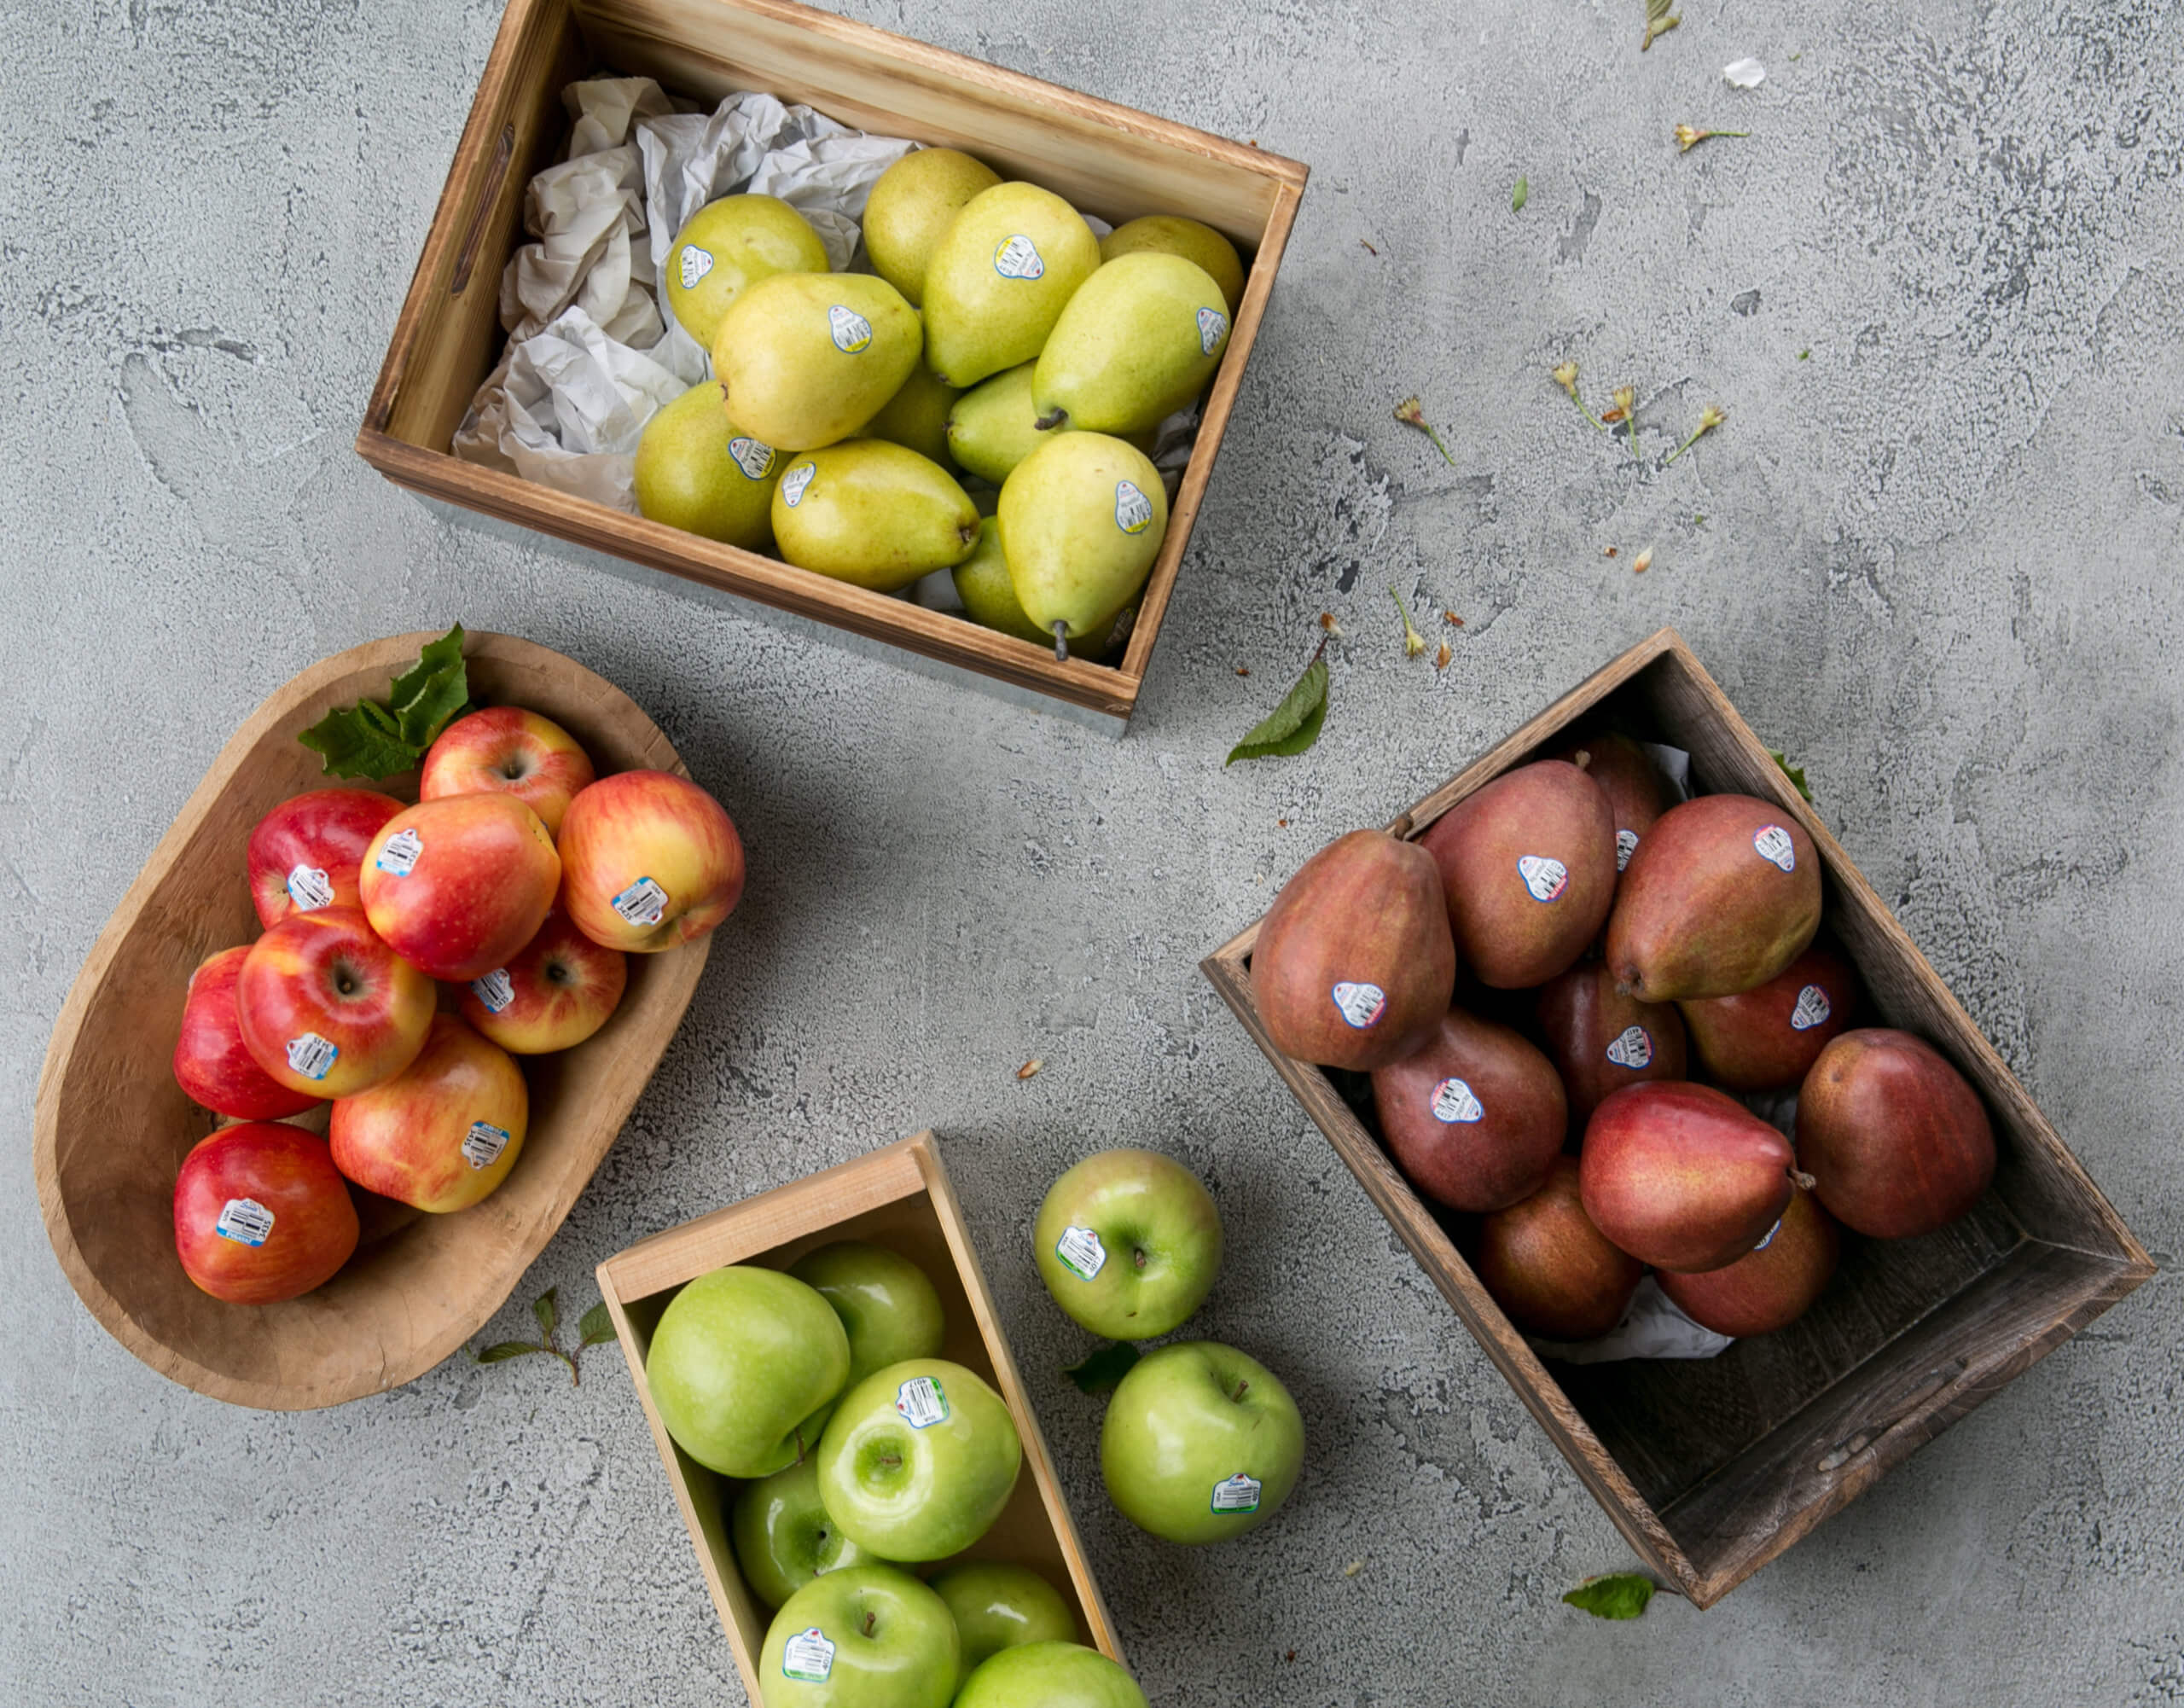 Apples and pears in wood boxes on a counter top